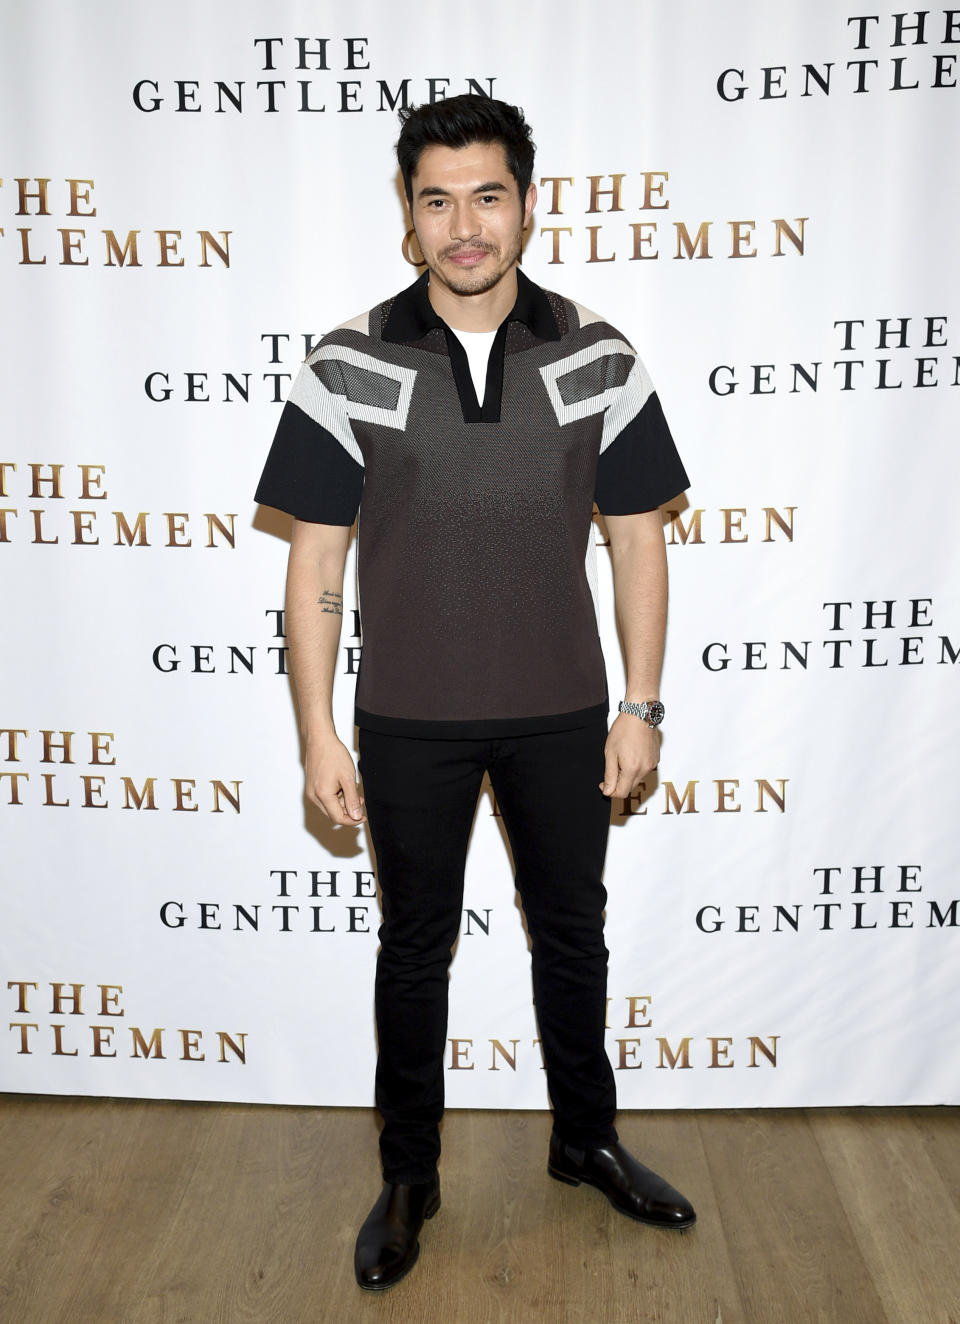 FILE - Henry Golding participates in "The Gentlemen" cast photo call on Jan. 11, 2020, in New York. Golding turns 36 on Feb. 5. (Photo by Evan Agostini/Invision/AP, File)